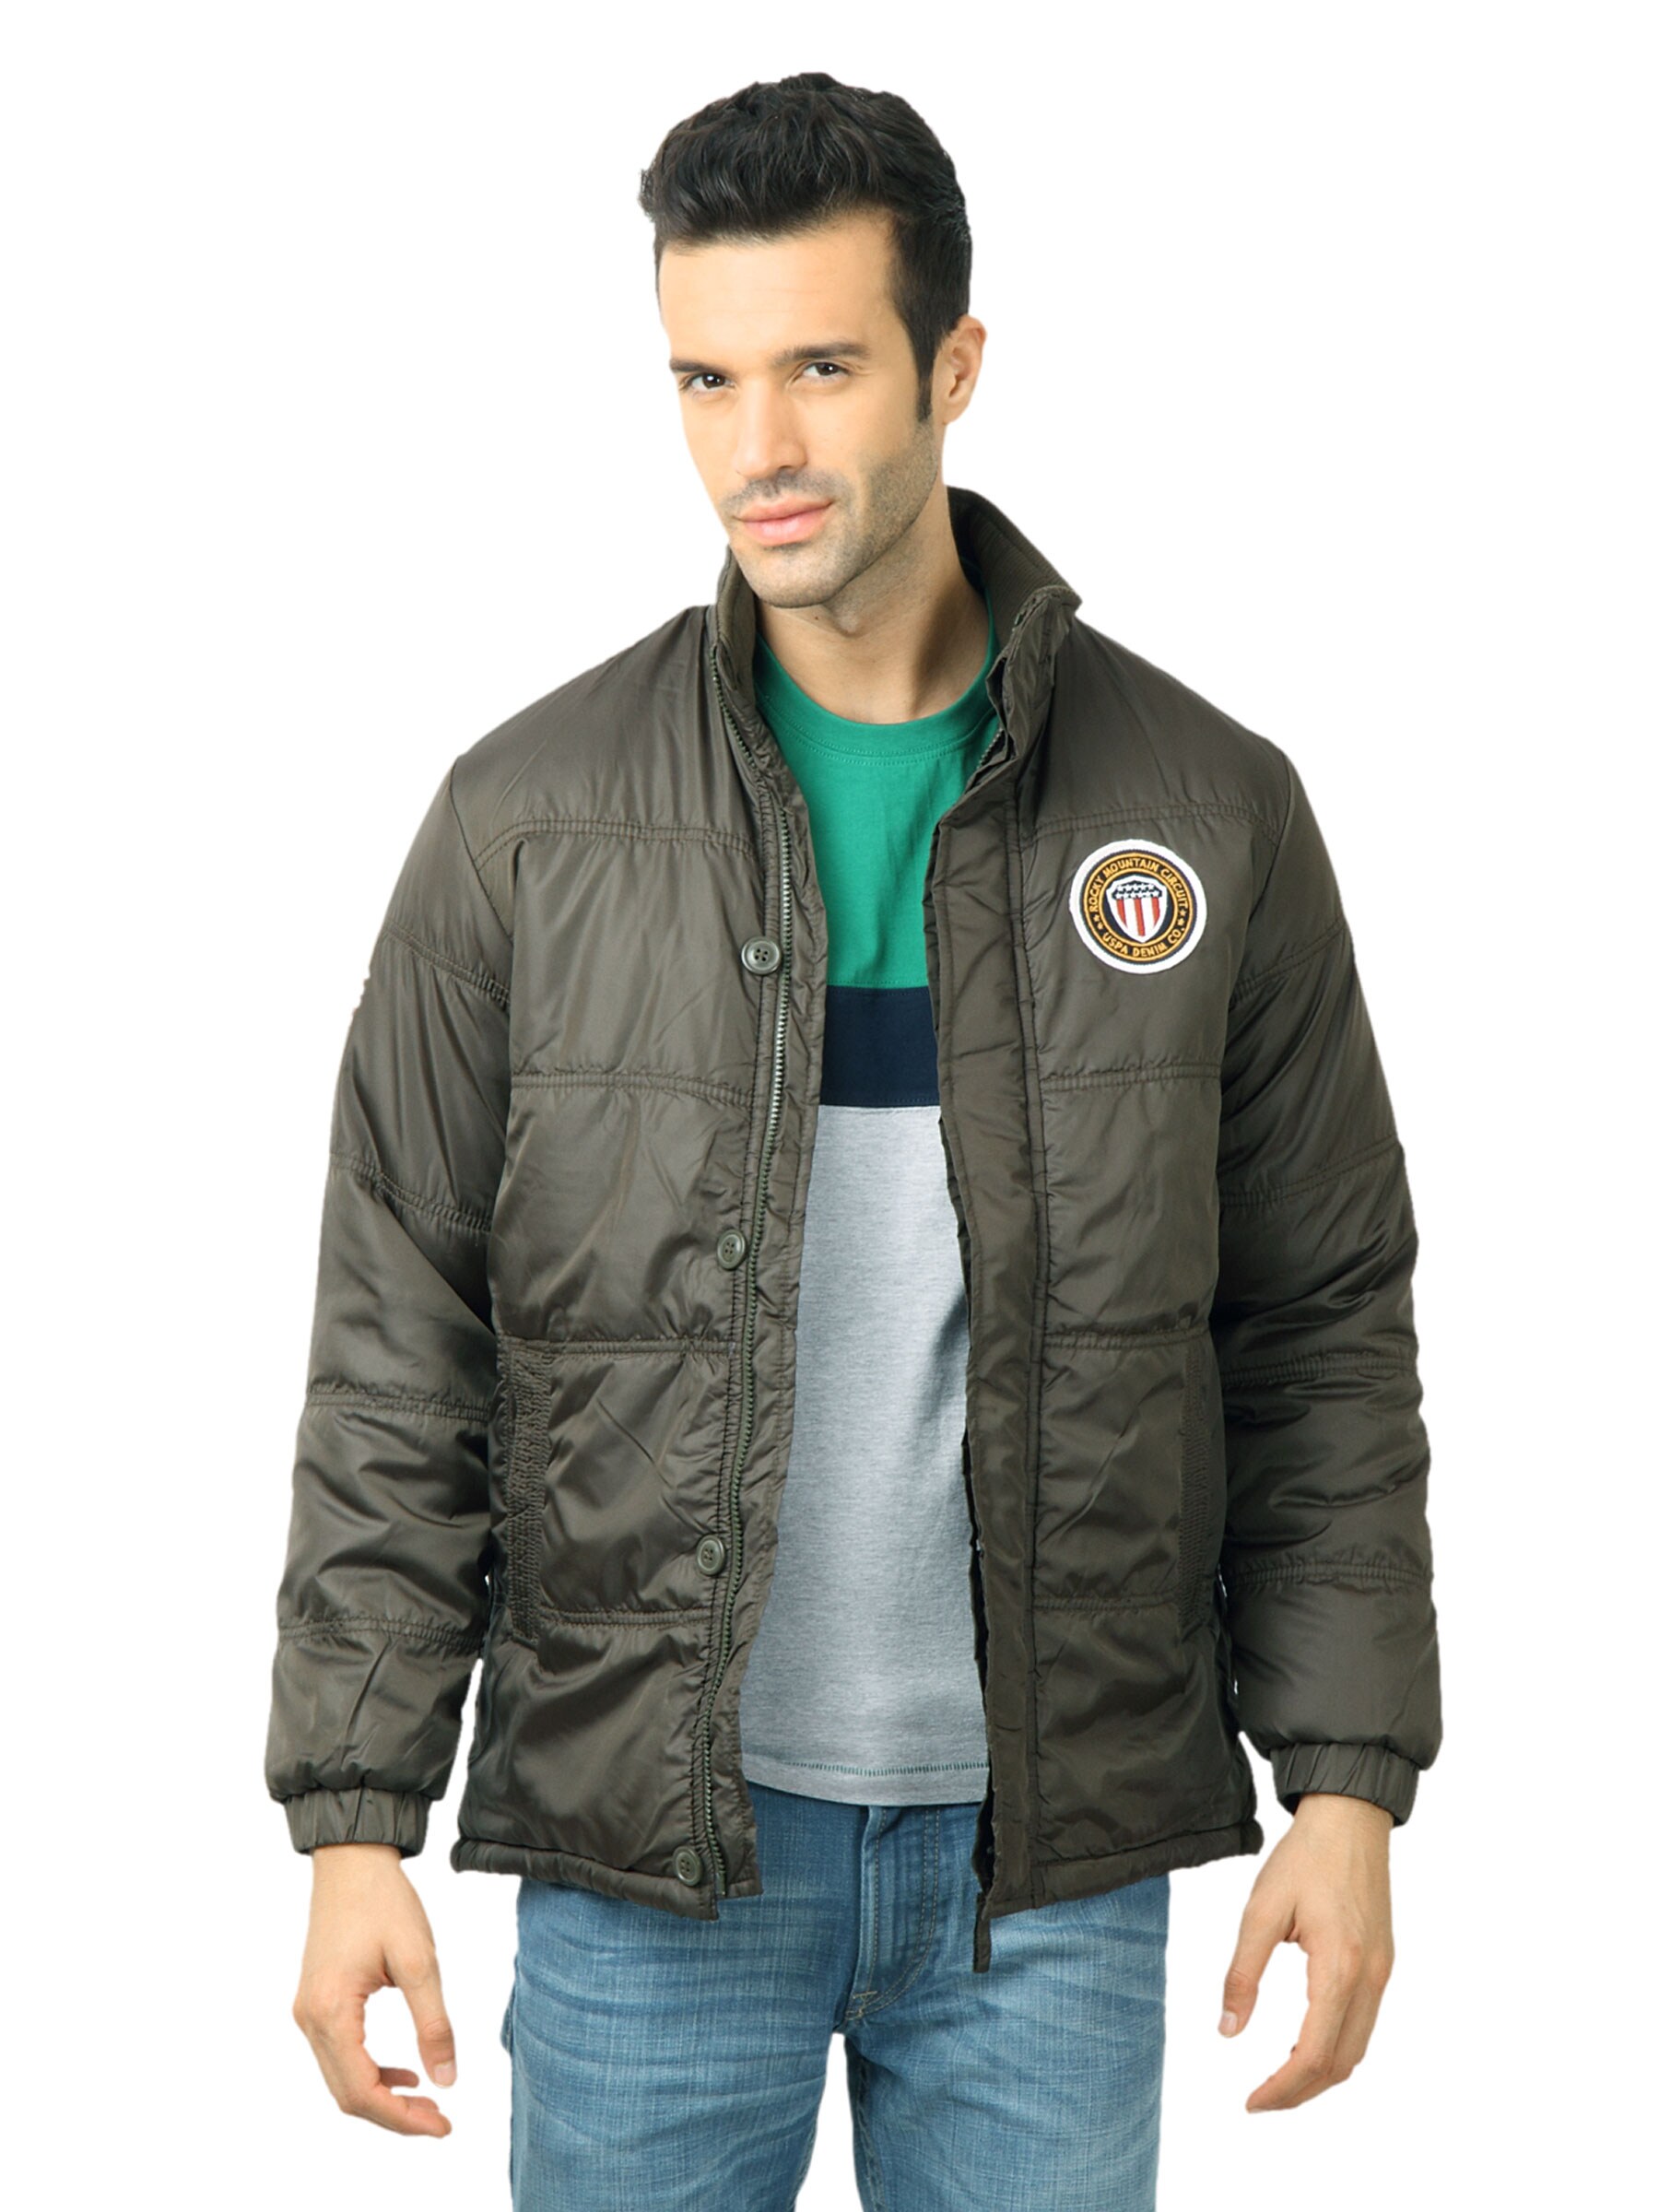 U.S. Polo Assn. Men Solid Olive Jackets